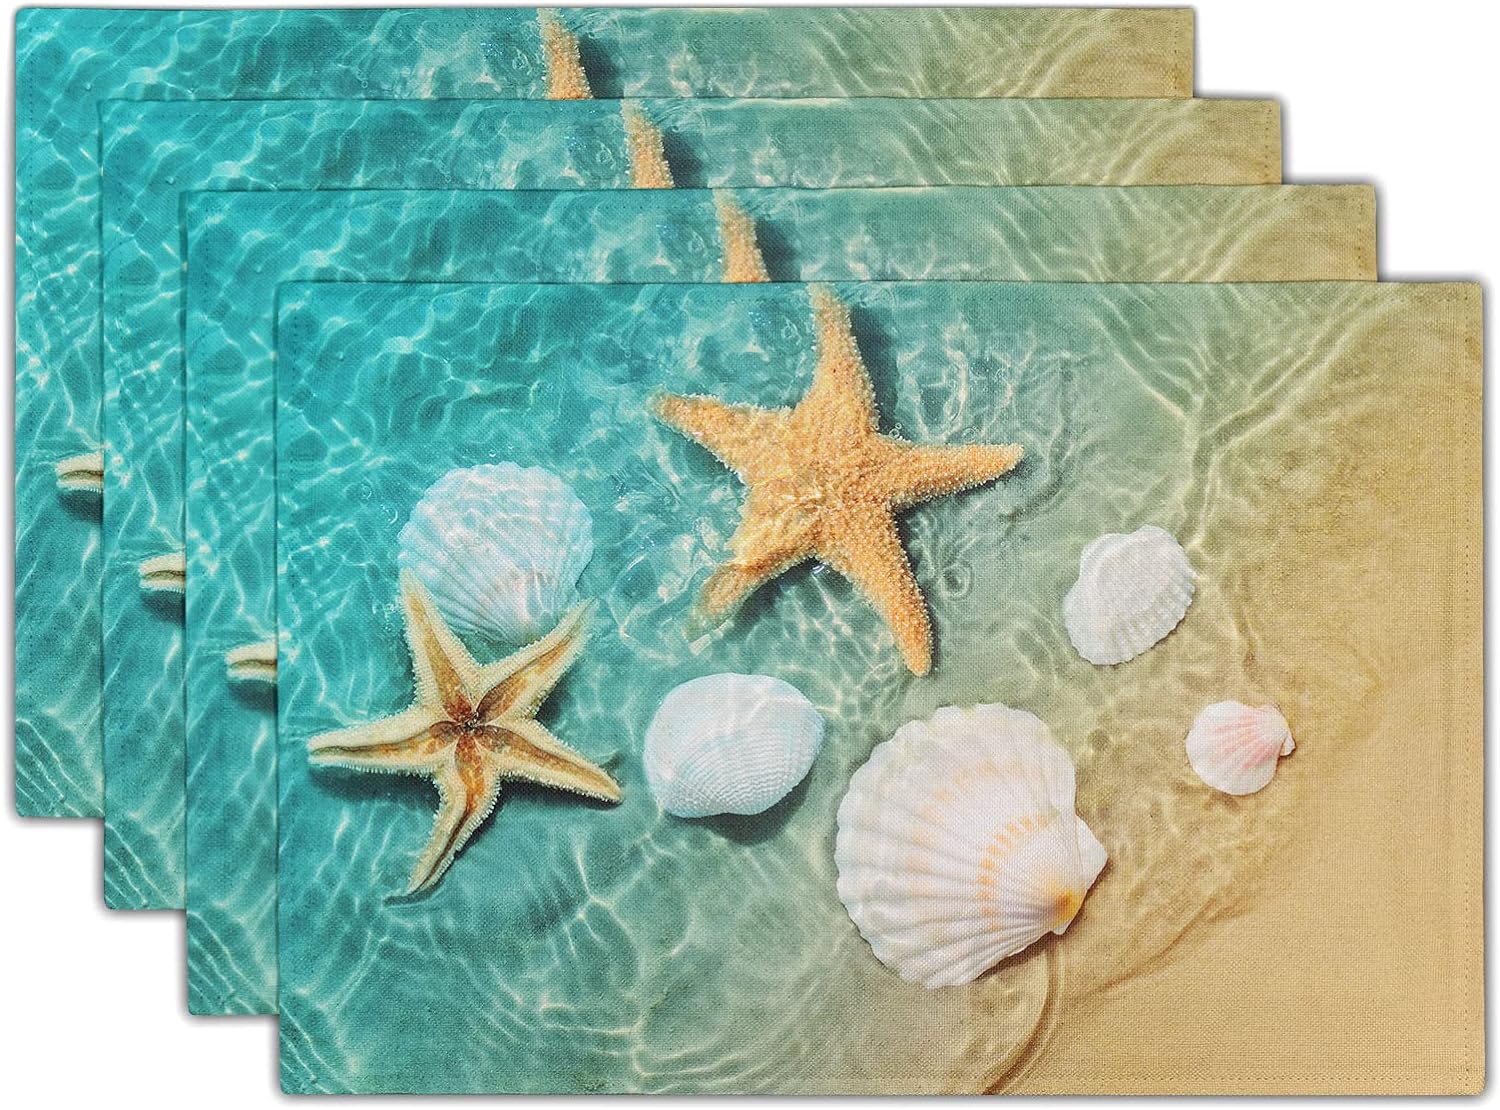 Seashell Starfish Placemats Set of 4 Washable Linen Beach Place Mats 12x18inch Ocean Blue Table Mats for Dining Table Farmhouse Kitchen Decor